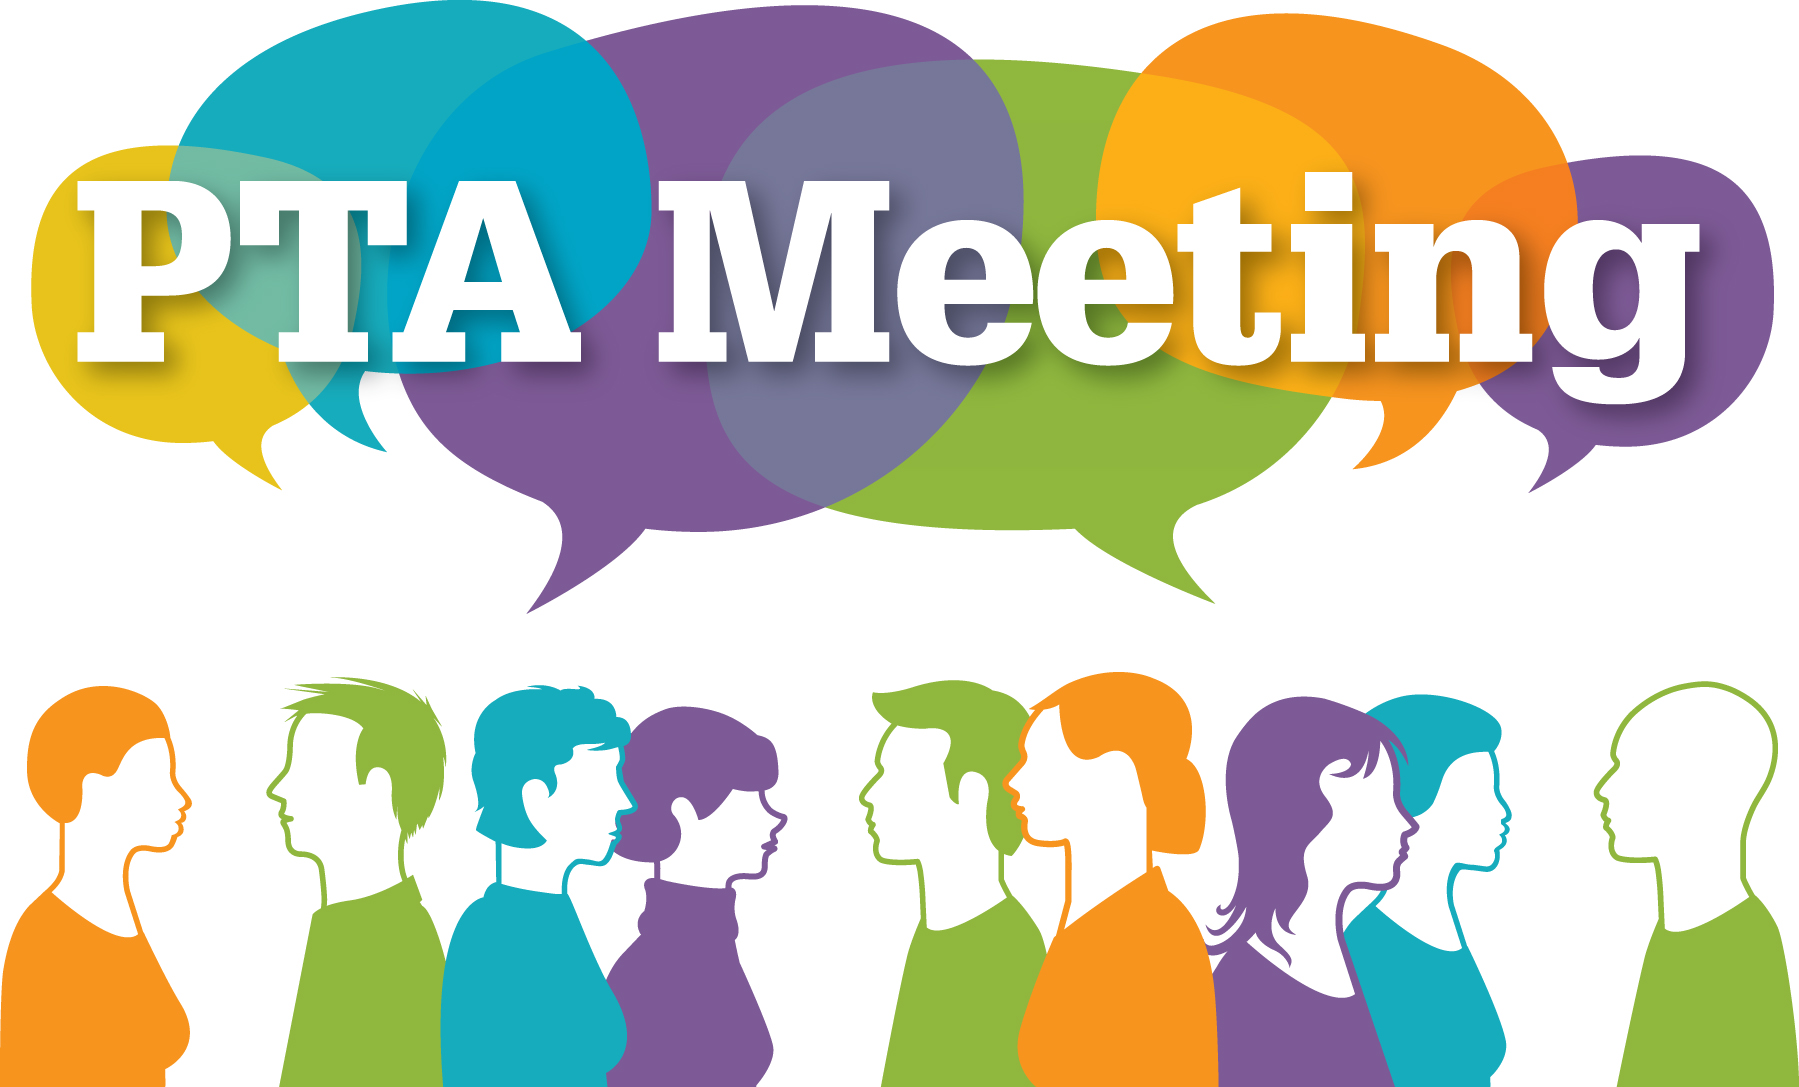 February 12 –  PTA Meeting and Health Education Curriculum Information Session